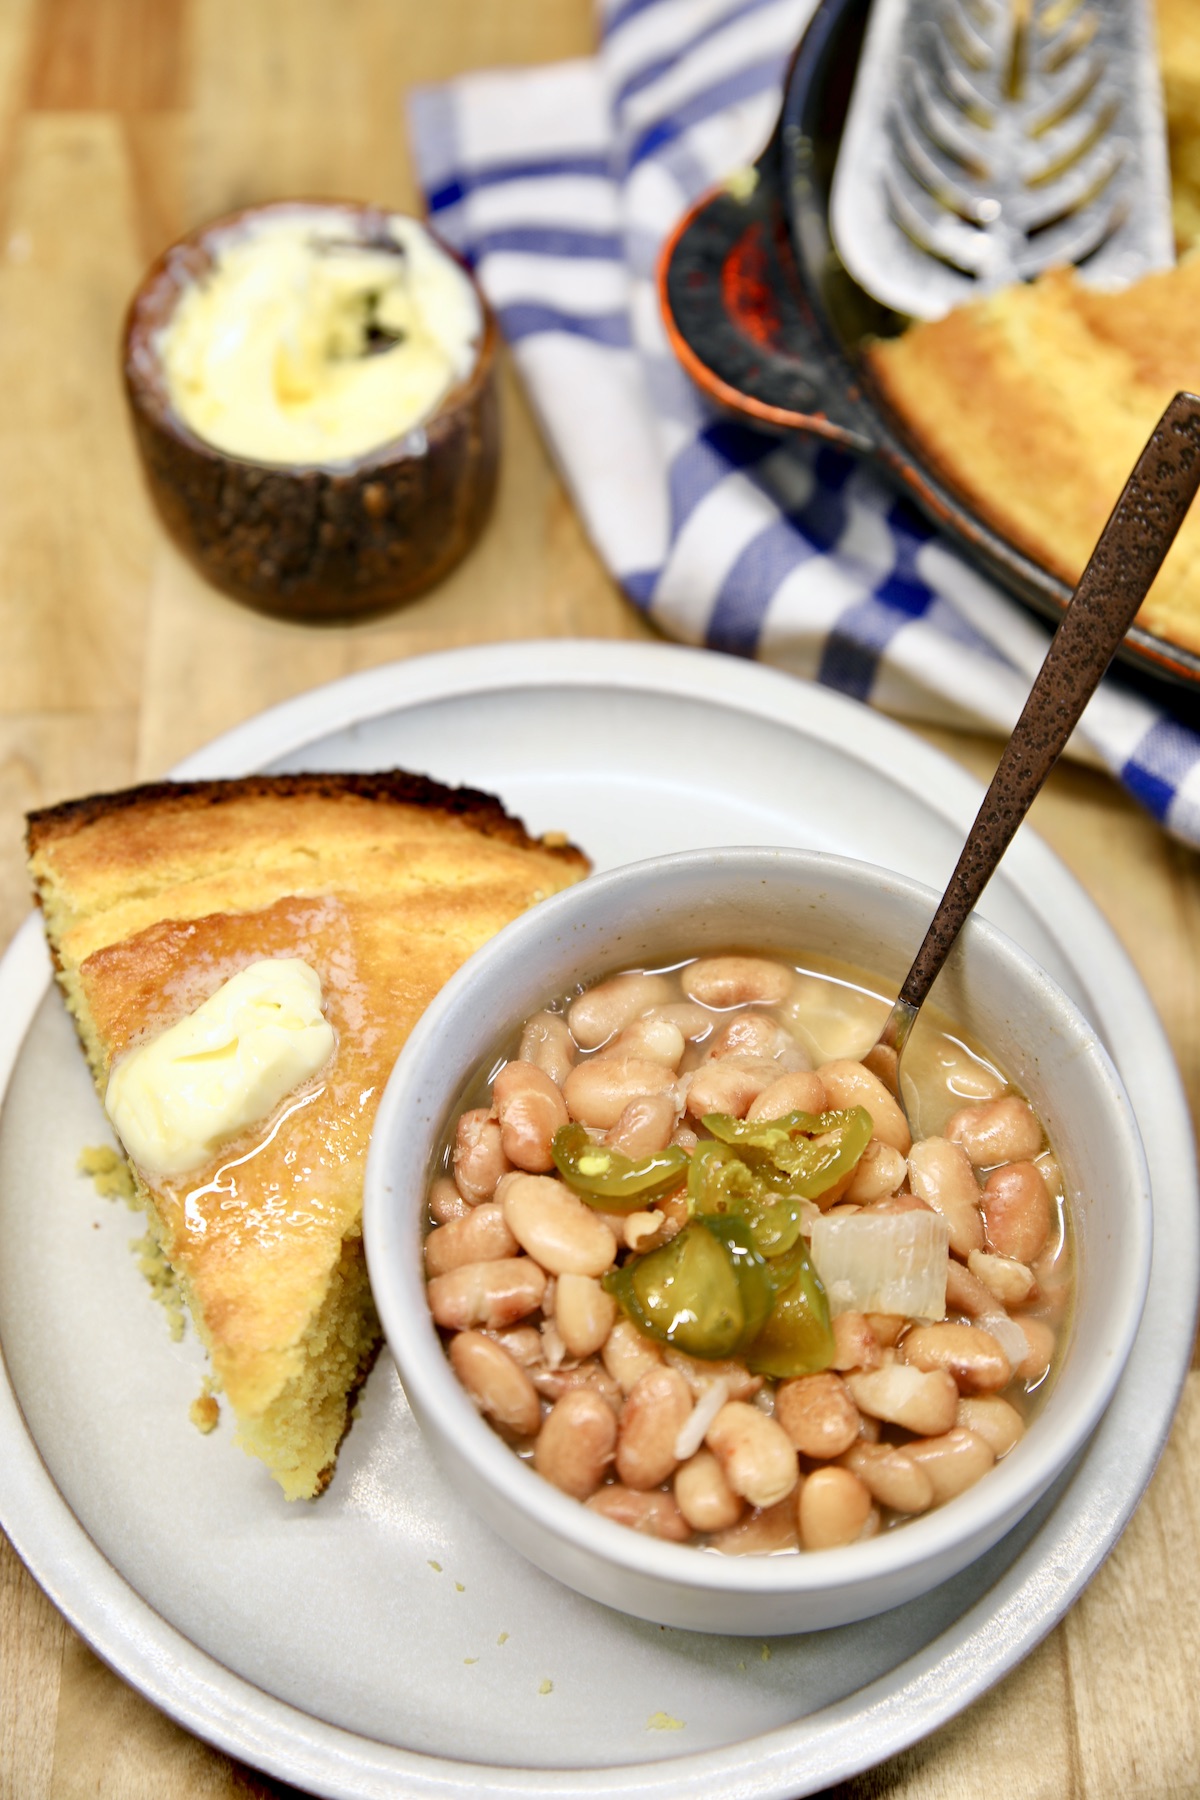 Bowl of pinto beans with slice of cornbread.